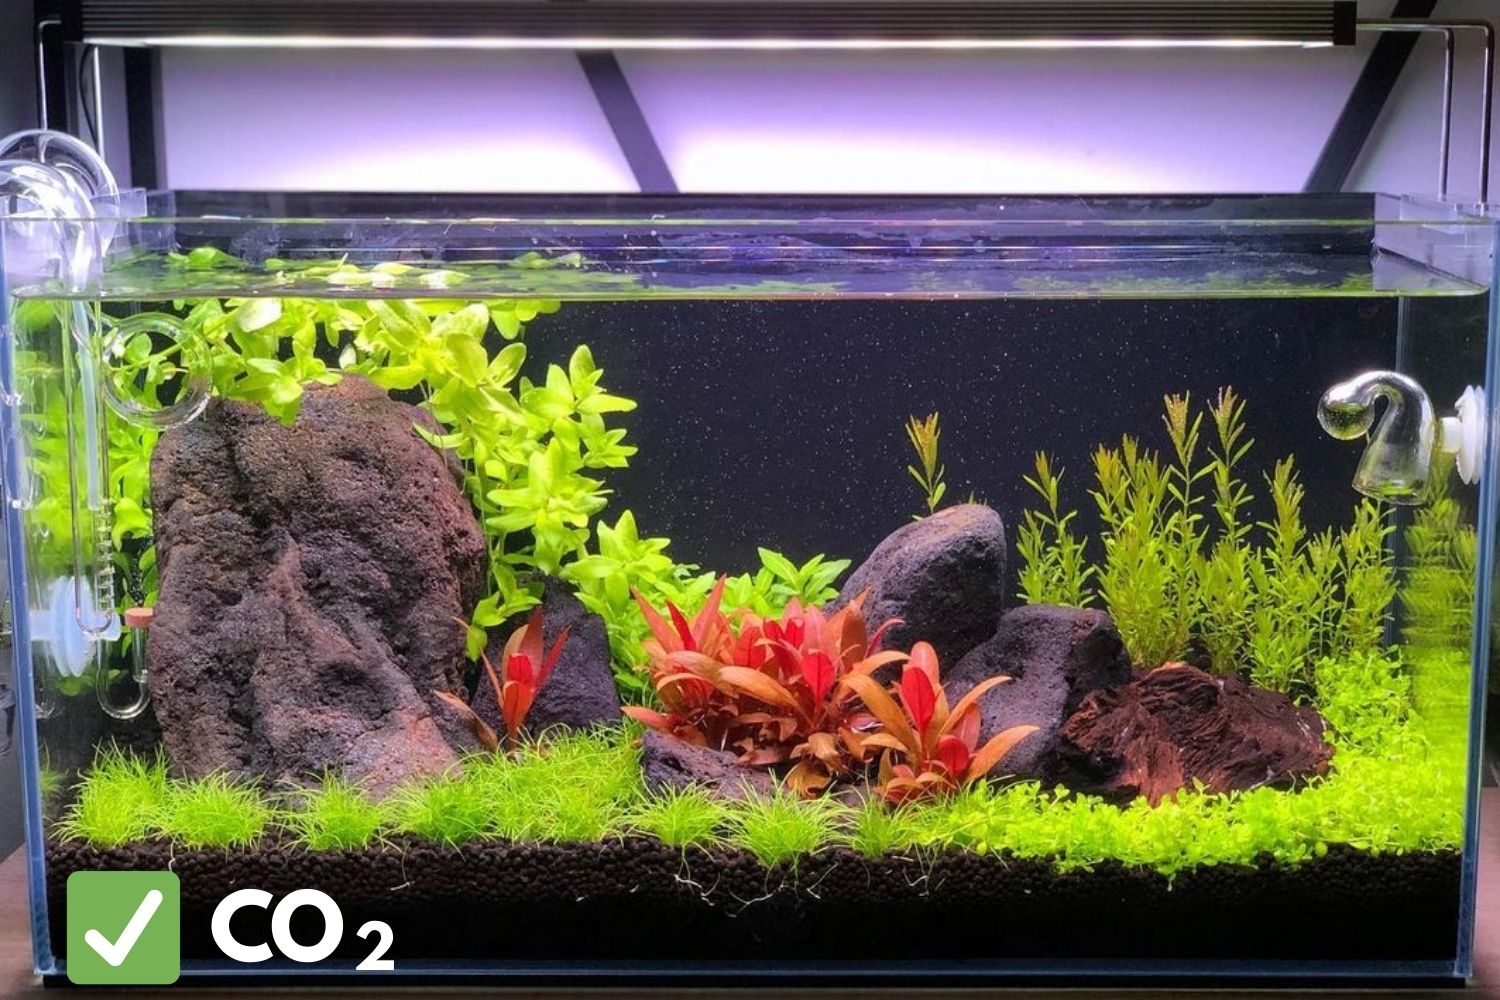 co2 results in planted tank after